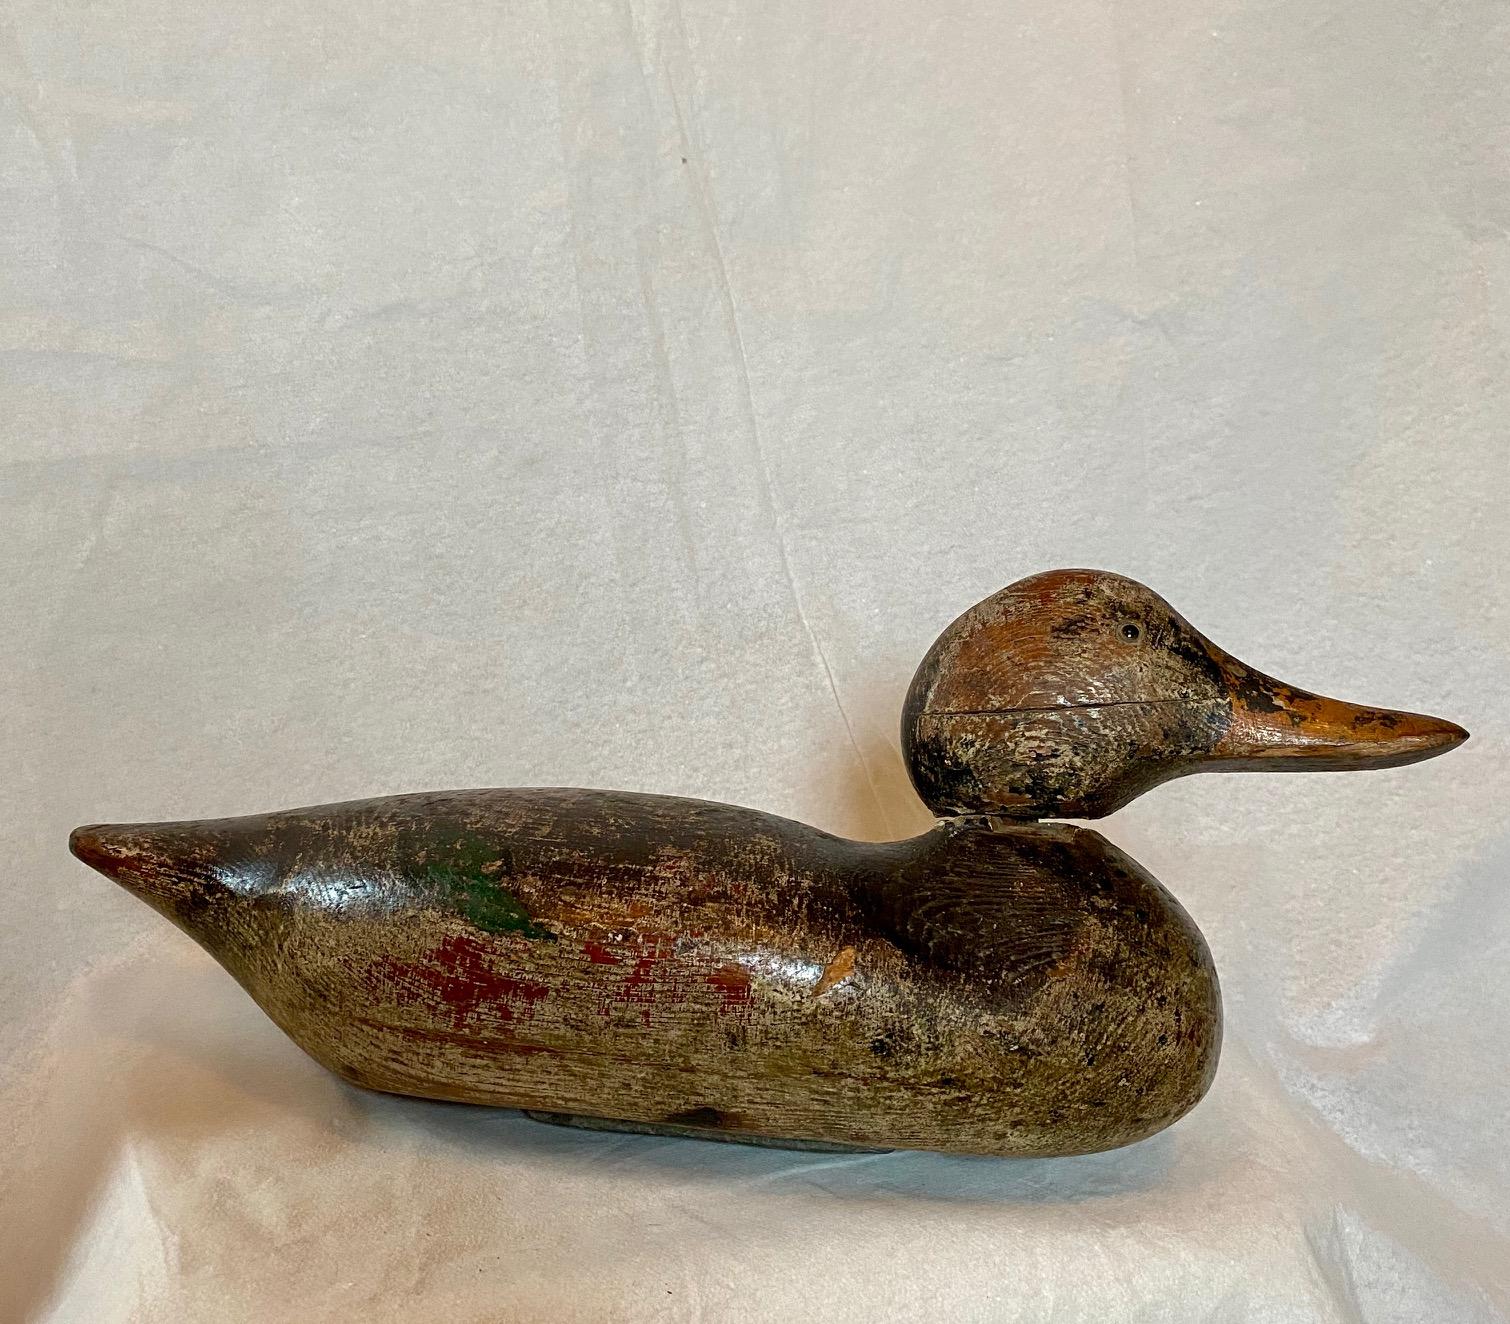 Early Peterson Mallard Hen Decoy, circa 1880, a proud and pioneer factory decoy with glass eyes, good worn original paint with possibly some old working touch-ups to the black on tail and shoulders, nice speckling on breast, very long bill and